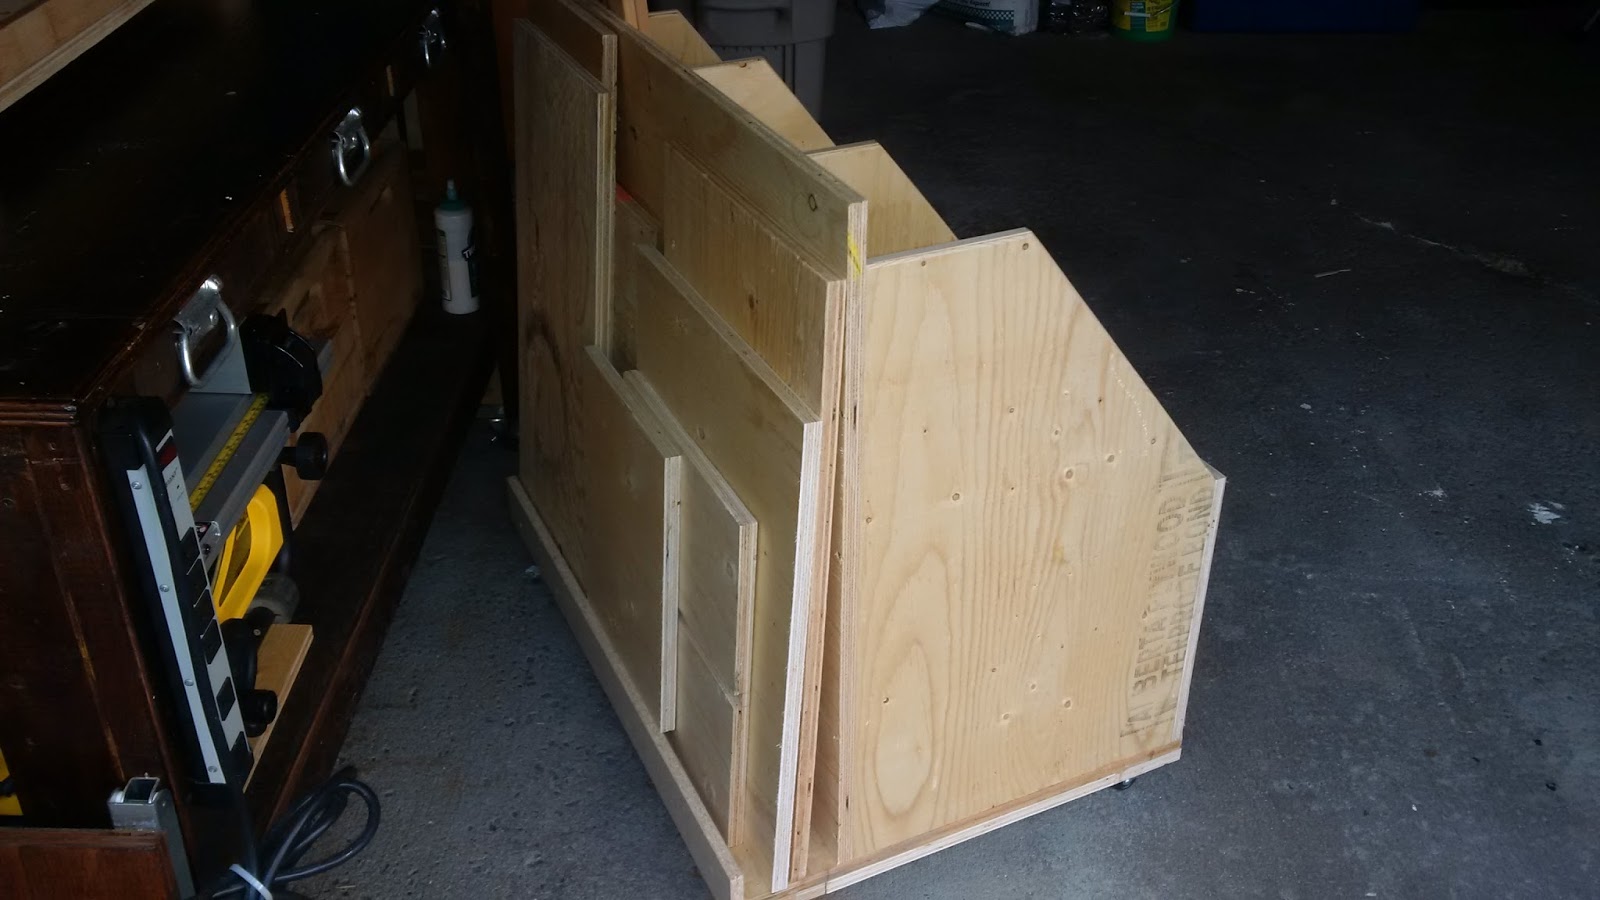 Home Reno/Woodworking Projects: Rolling Lumber Storage Cart